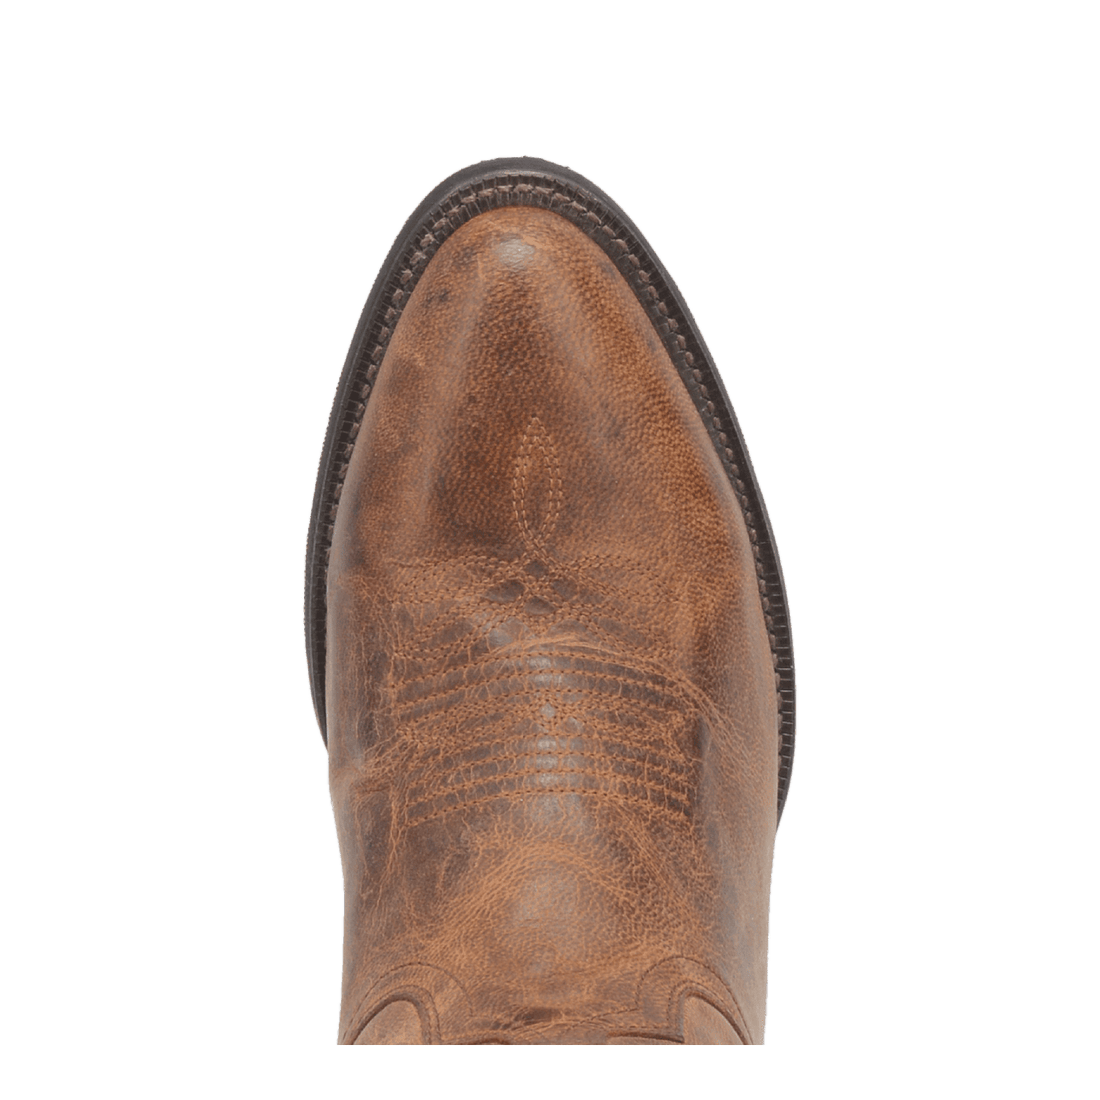 BIRCHWOOD LEATHER BOOT Preview #17